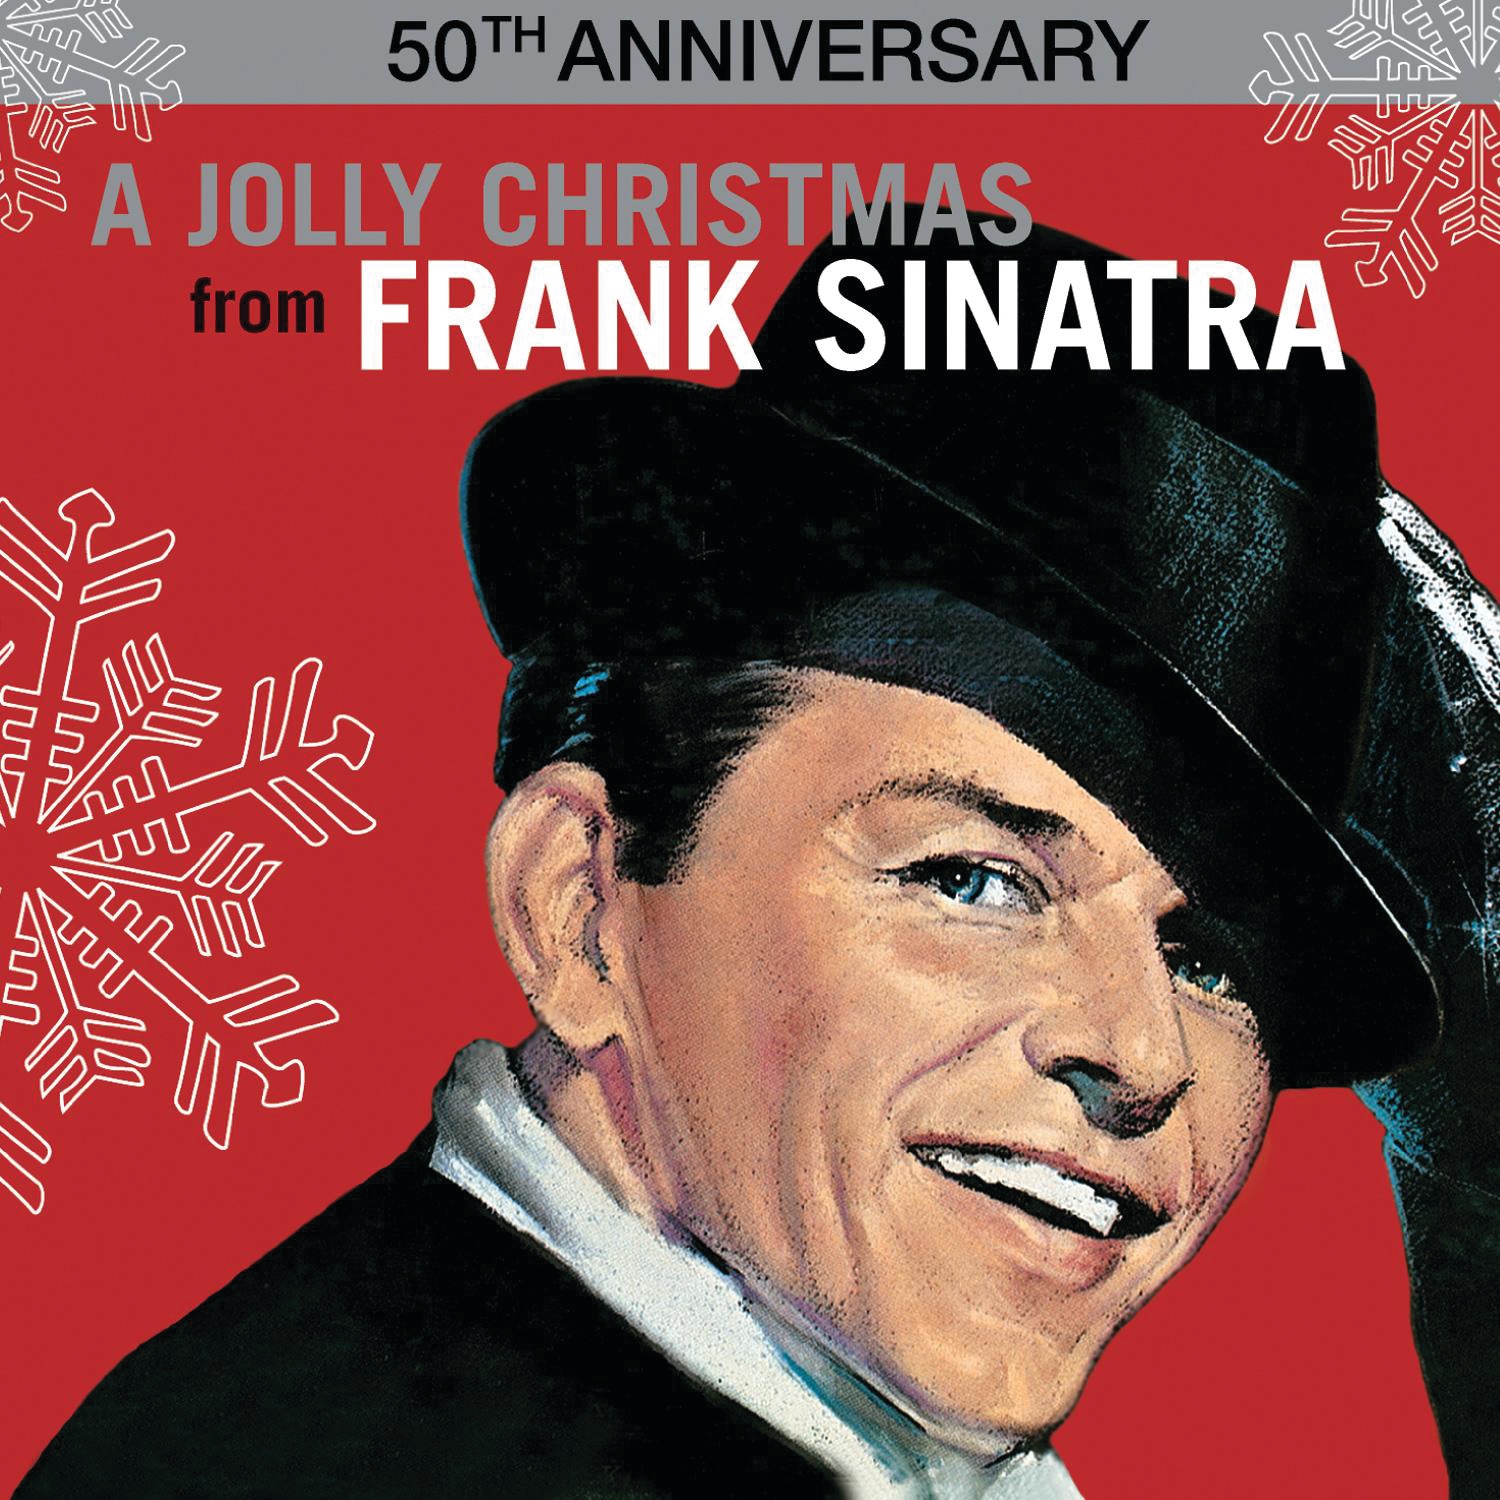 Frank Sinatra - Have Yourself a Merry Little Christmas - Single